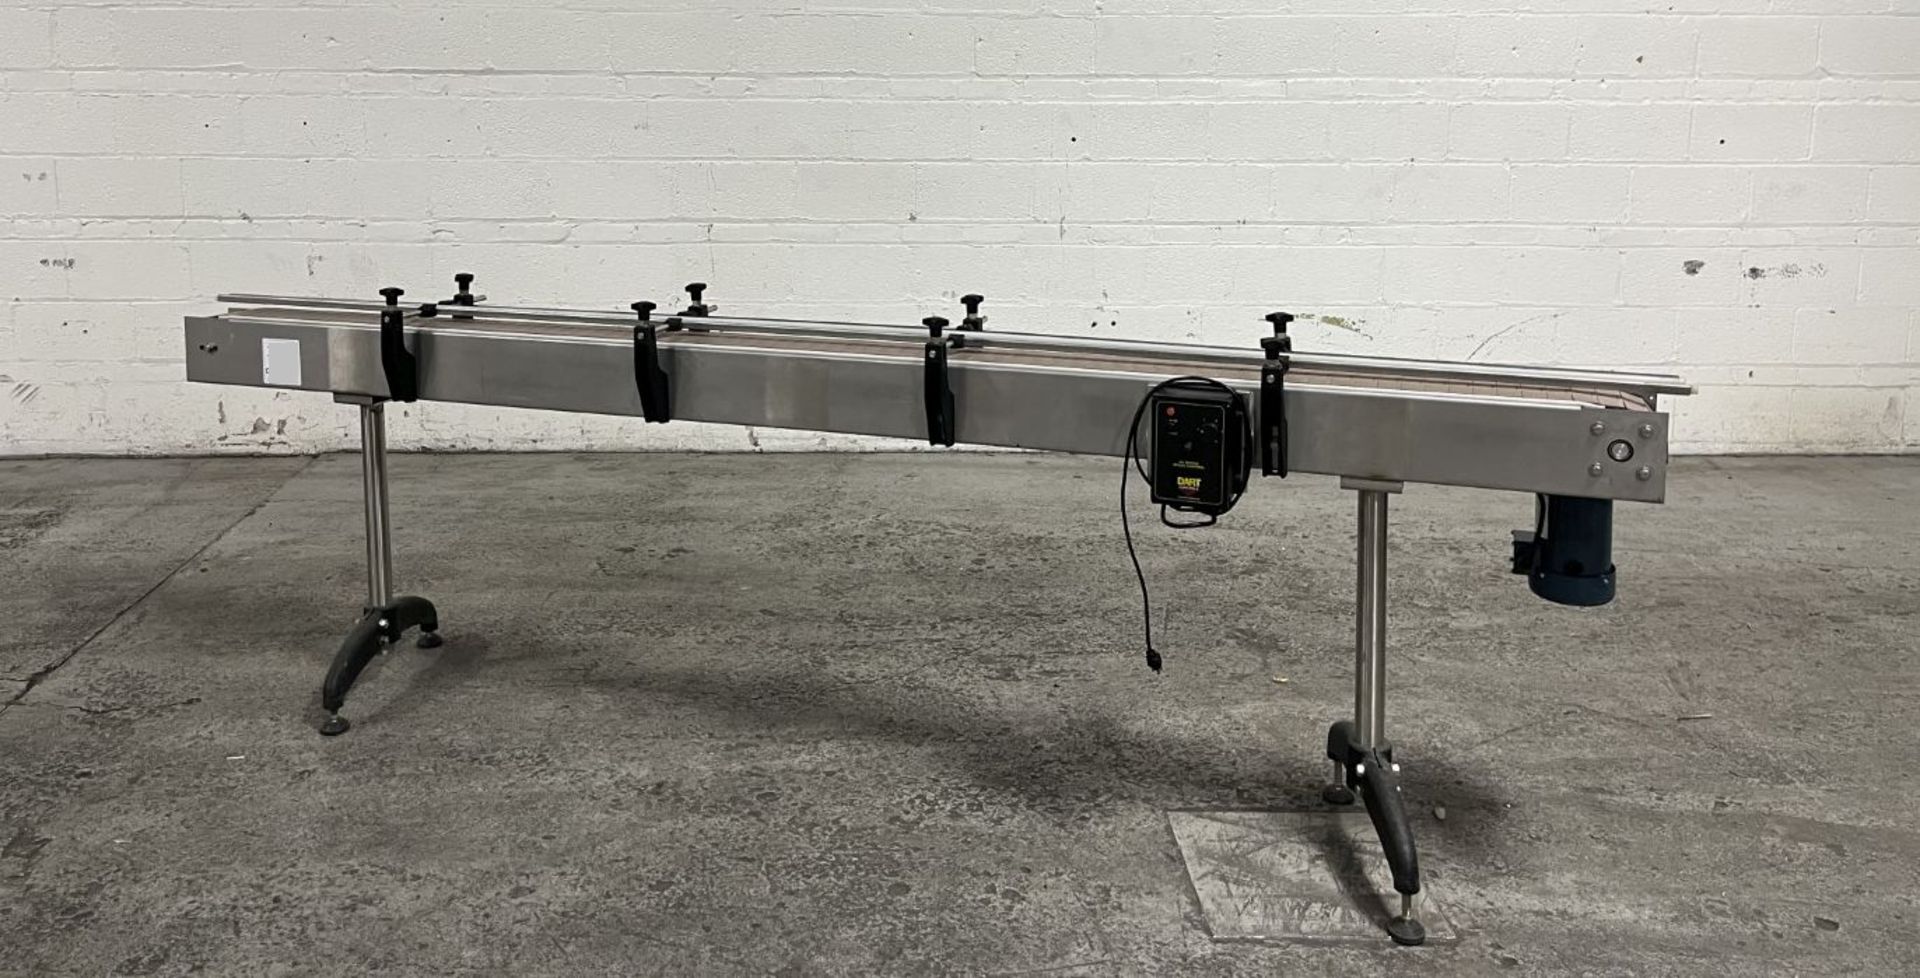 Stainless Steel Conveyor Section 4" x 10 ft